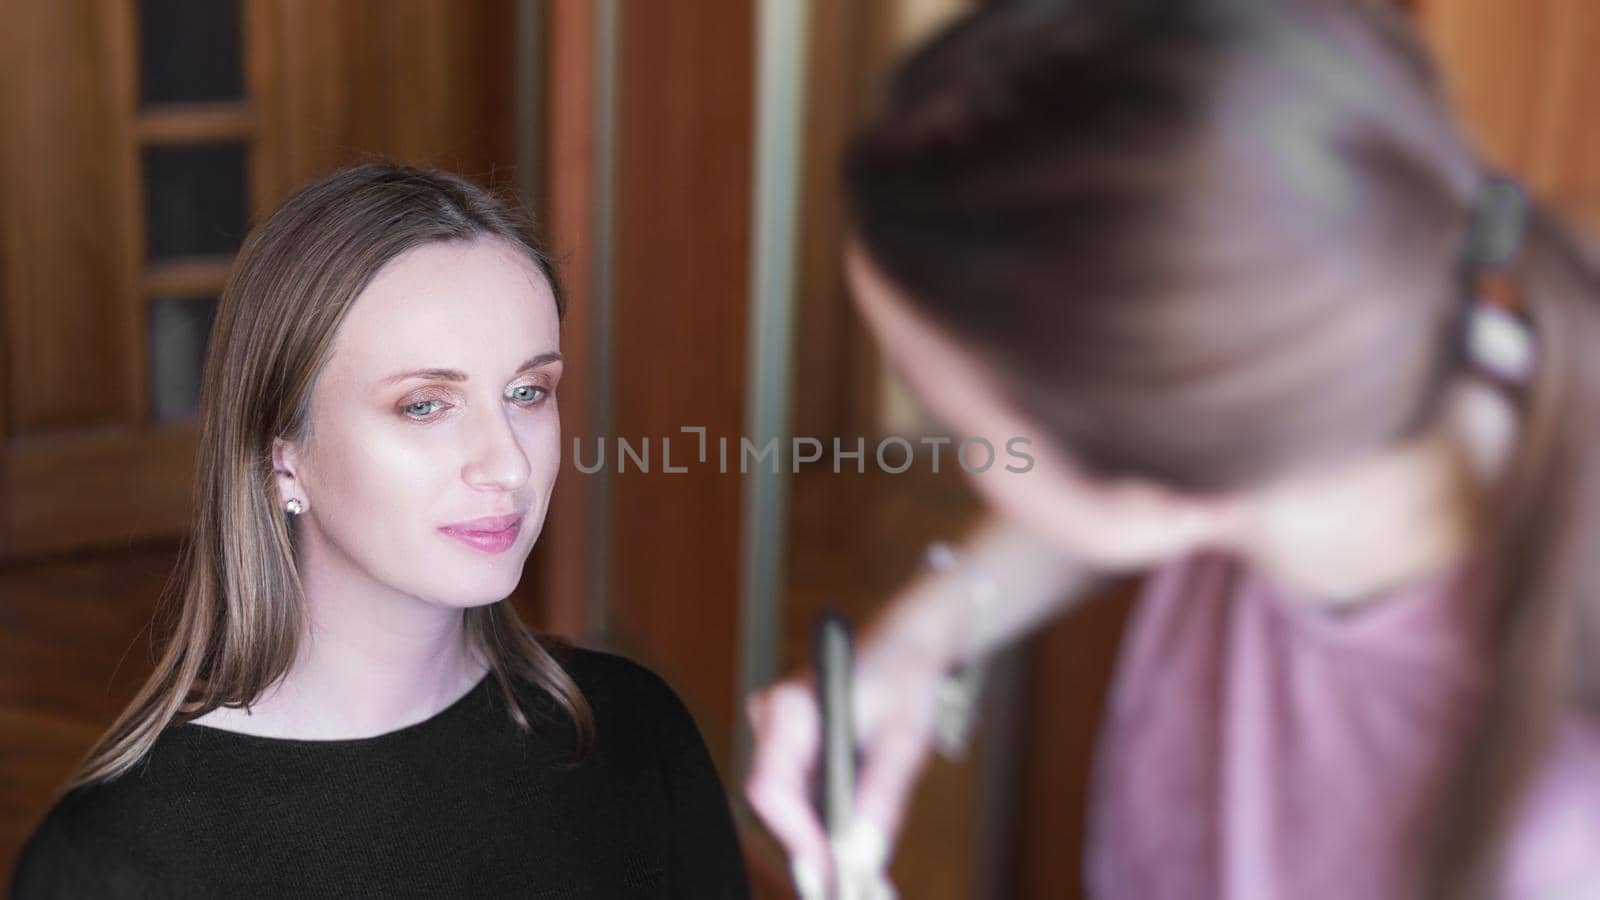 Process of making makeup. Make-up artist working with brush on model face. Portrait of young woman in home interior.